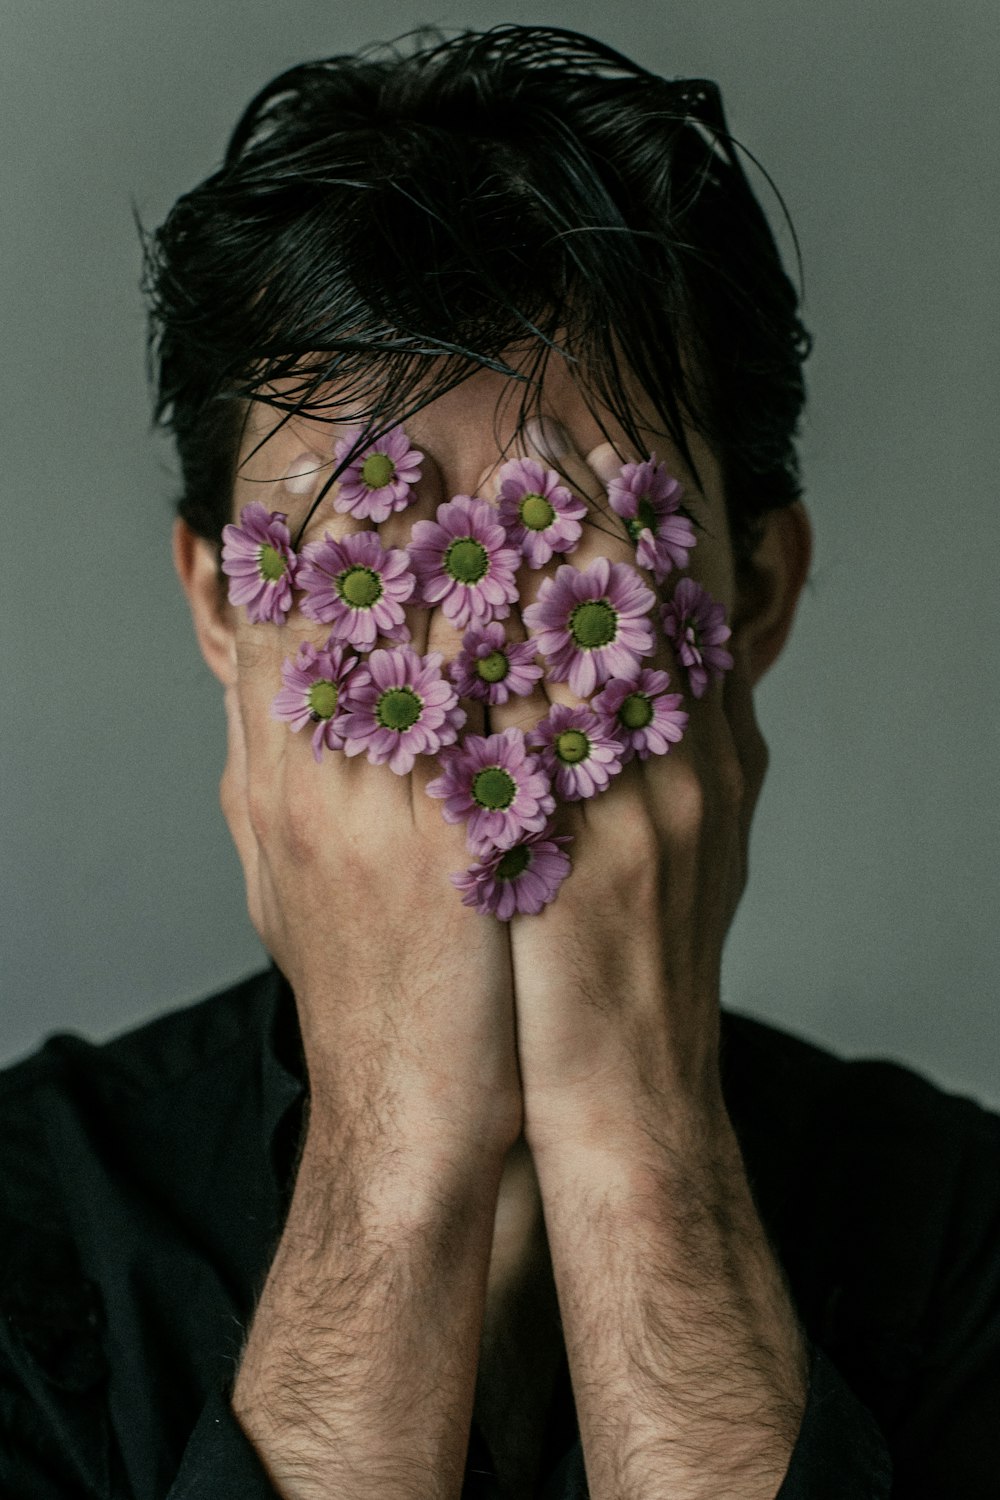 a man covering his face with purple flowers